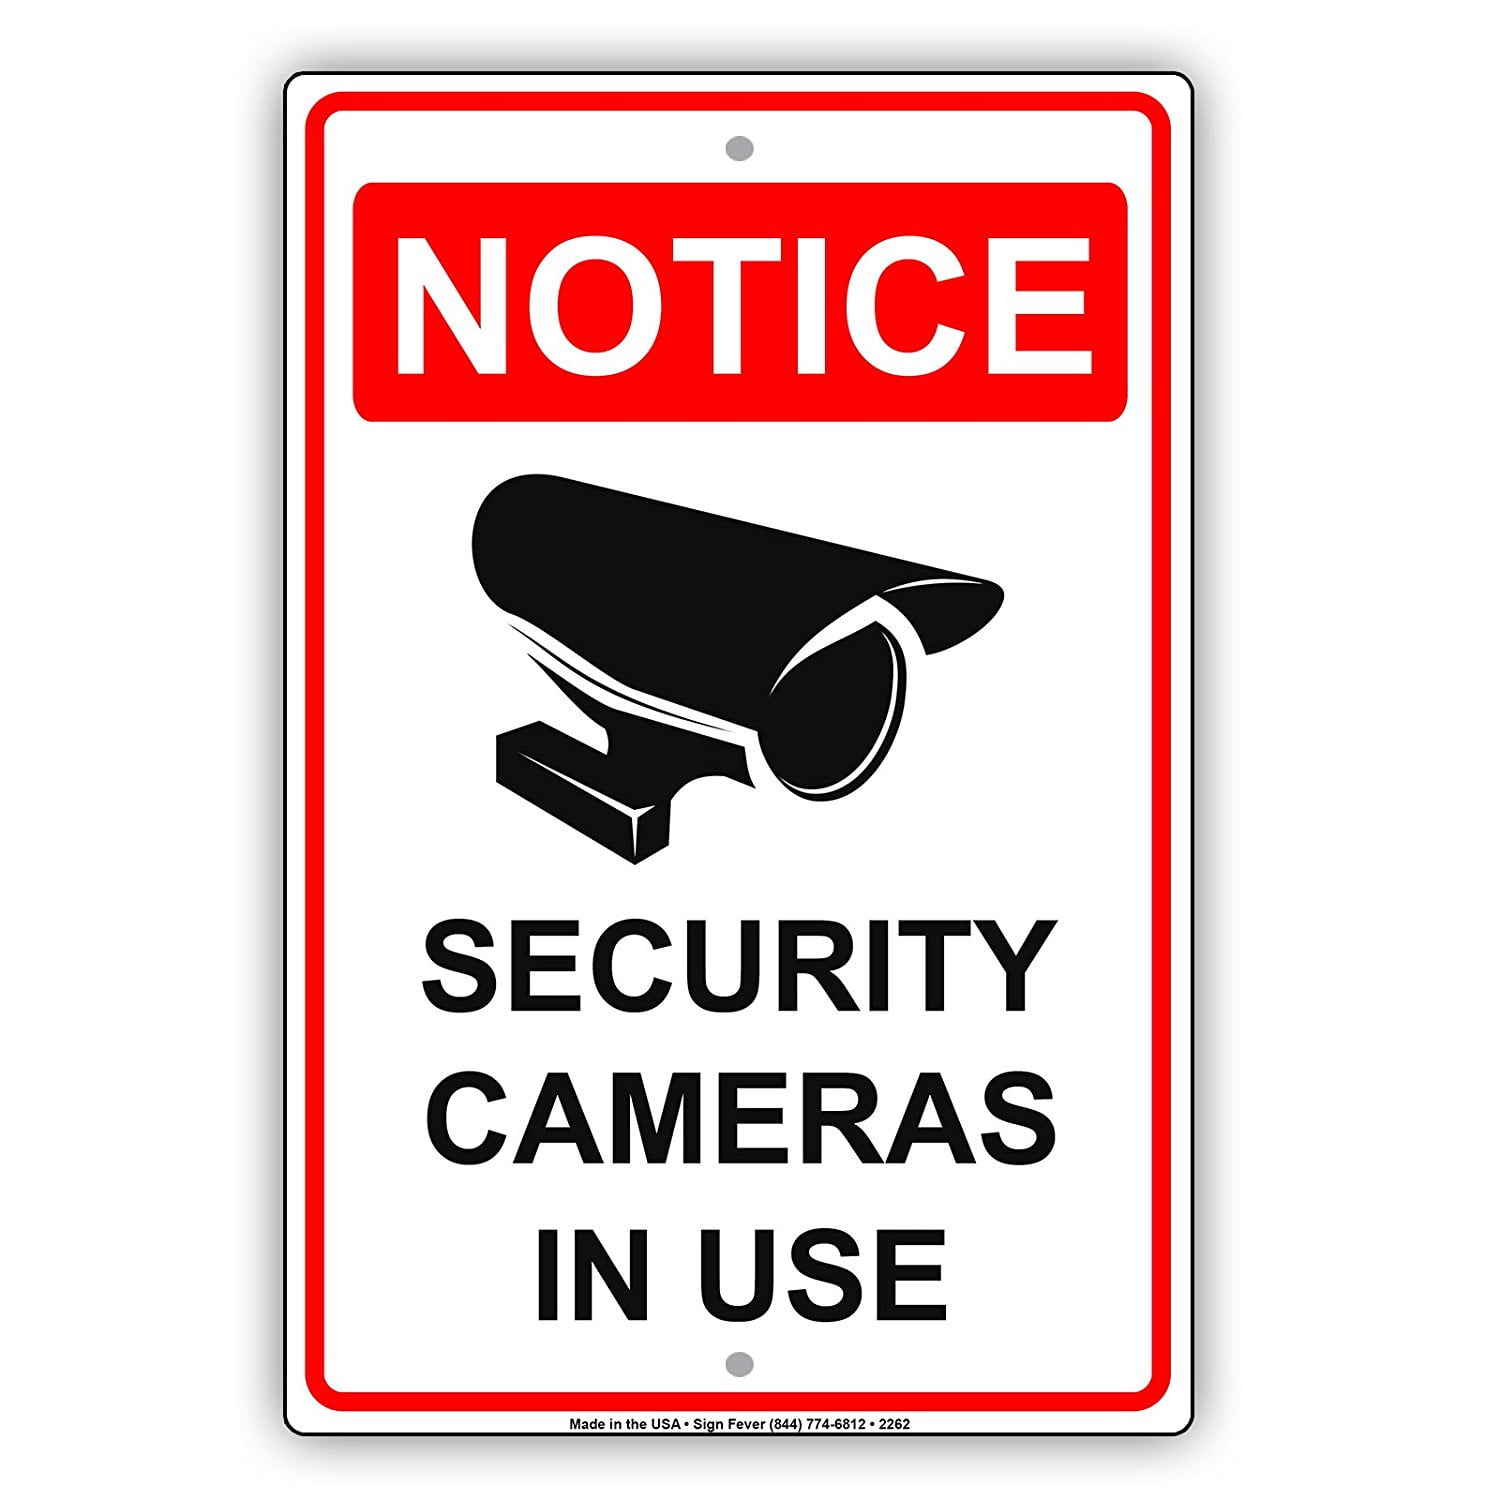 Security Camera in Use Print Video Camera Picture Notice Home Office Work School Business Sign Aluminum Metal 